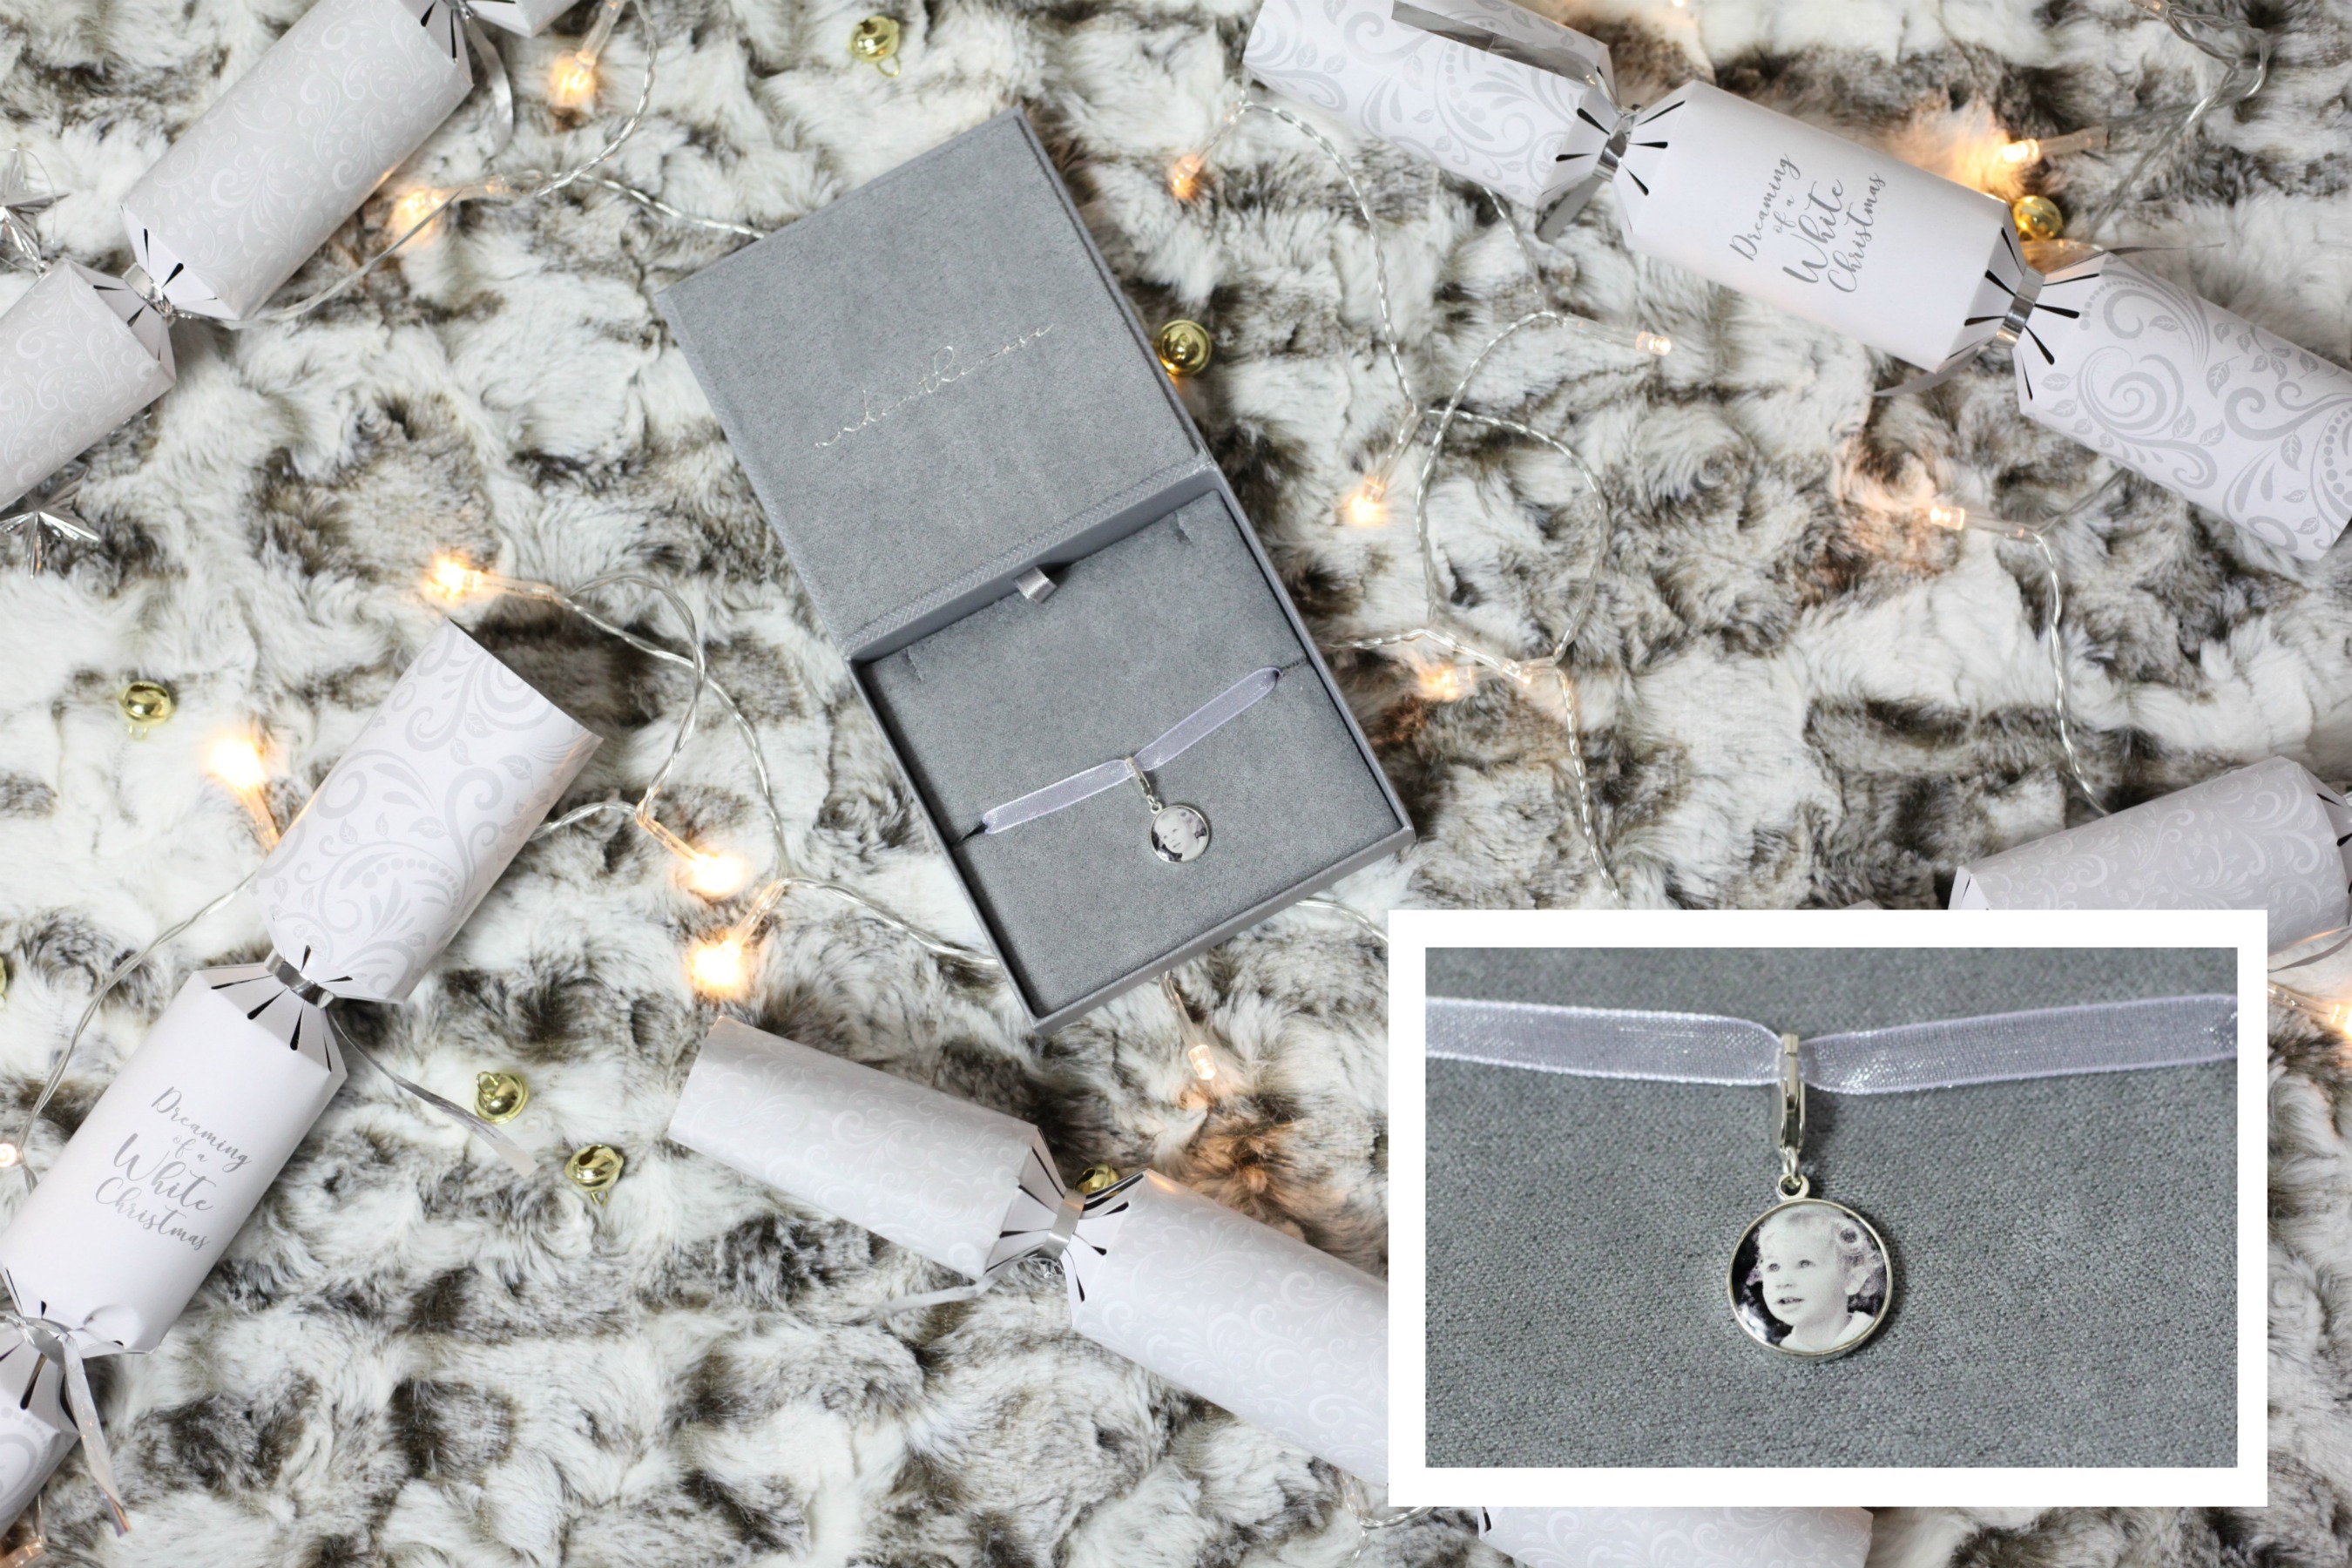 Luxurious Christmas gift ideas from Under the Rose jewellery